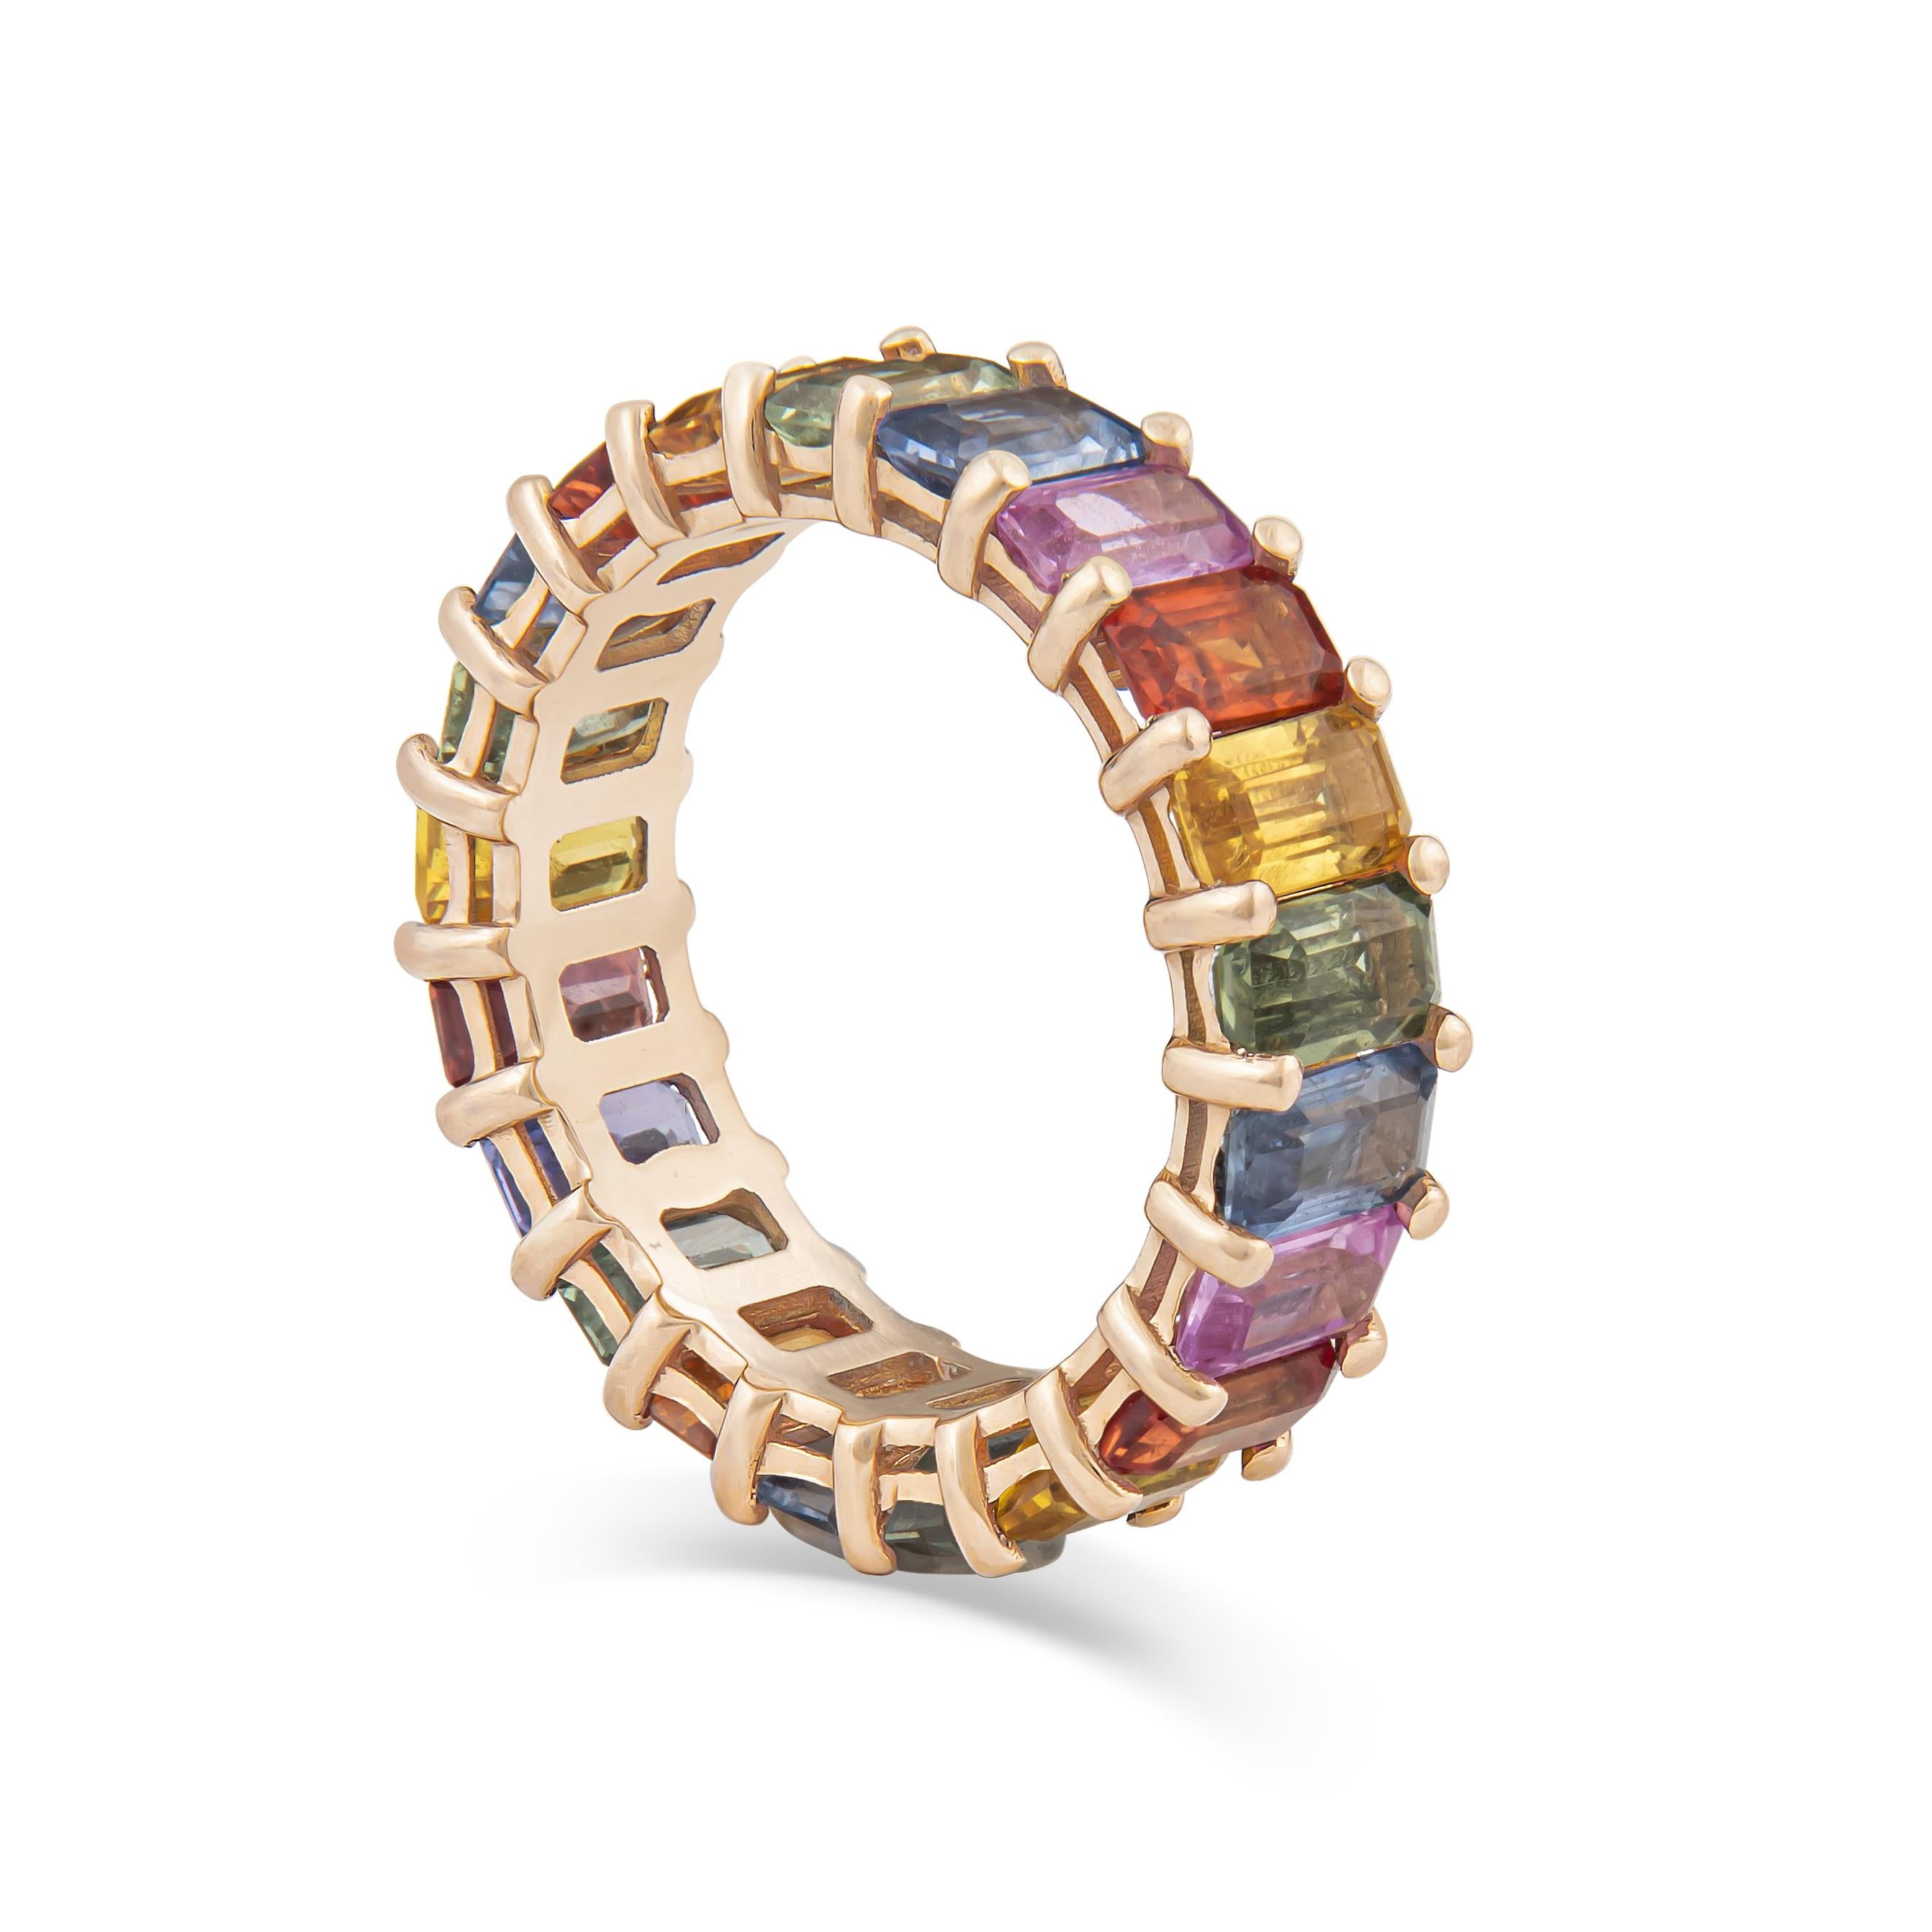 This beautiful eternity band features 7.93ct total weight in multi-colored emerald cut sapphires, set in an 14kt rose gold ring. The ring is currently a size 6, made by our on-site master jewelers. It is a simple way to add colored stone jewelry to